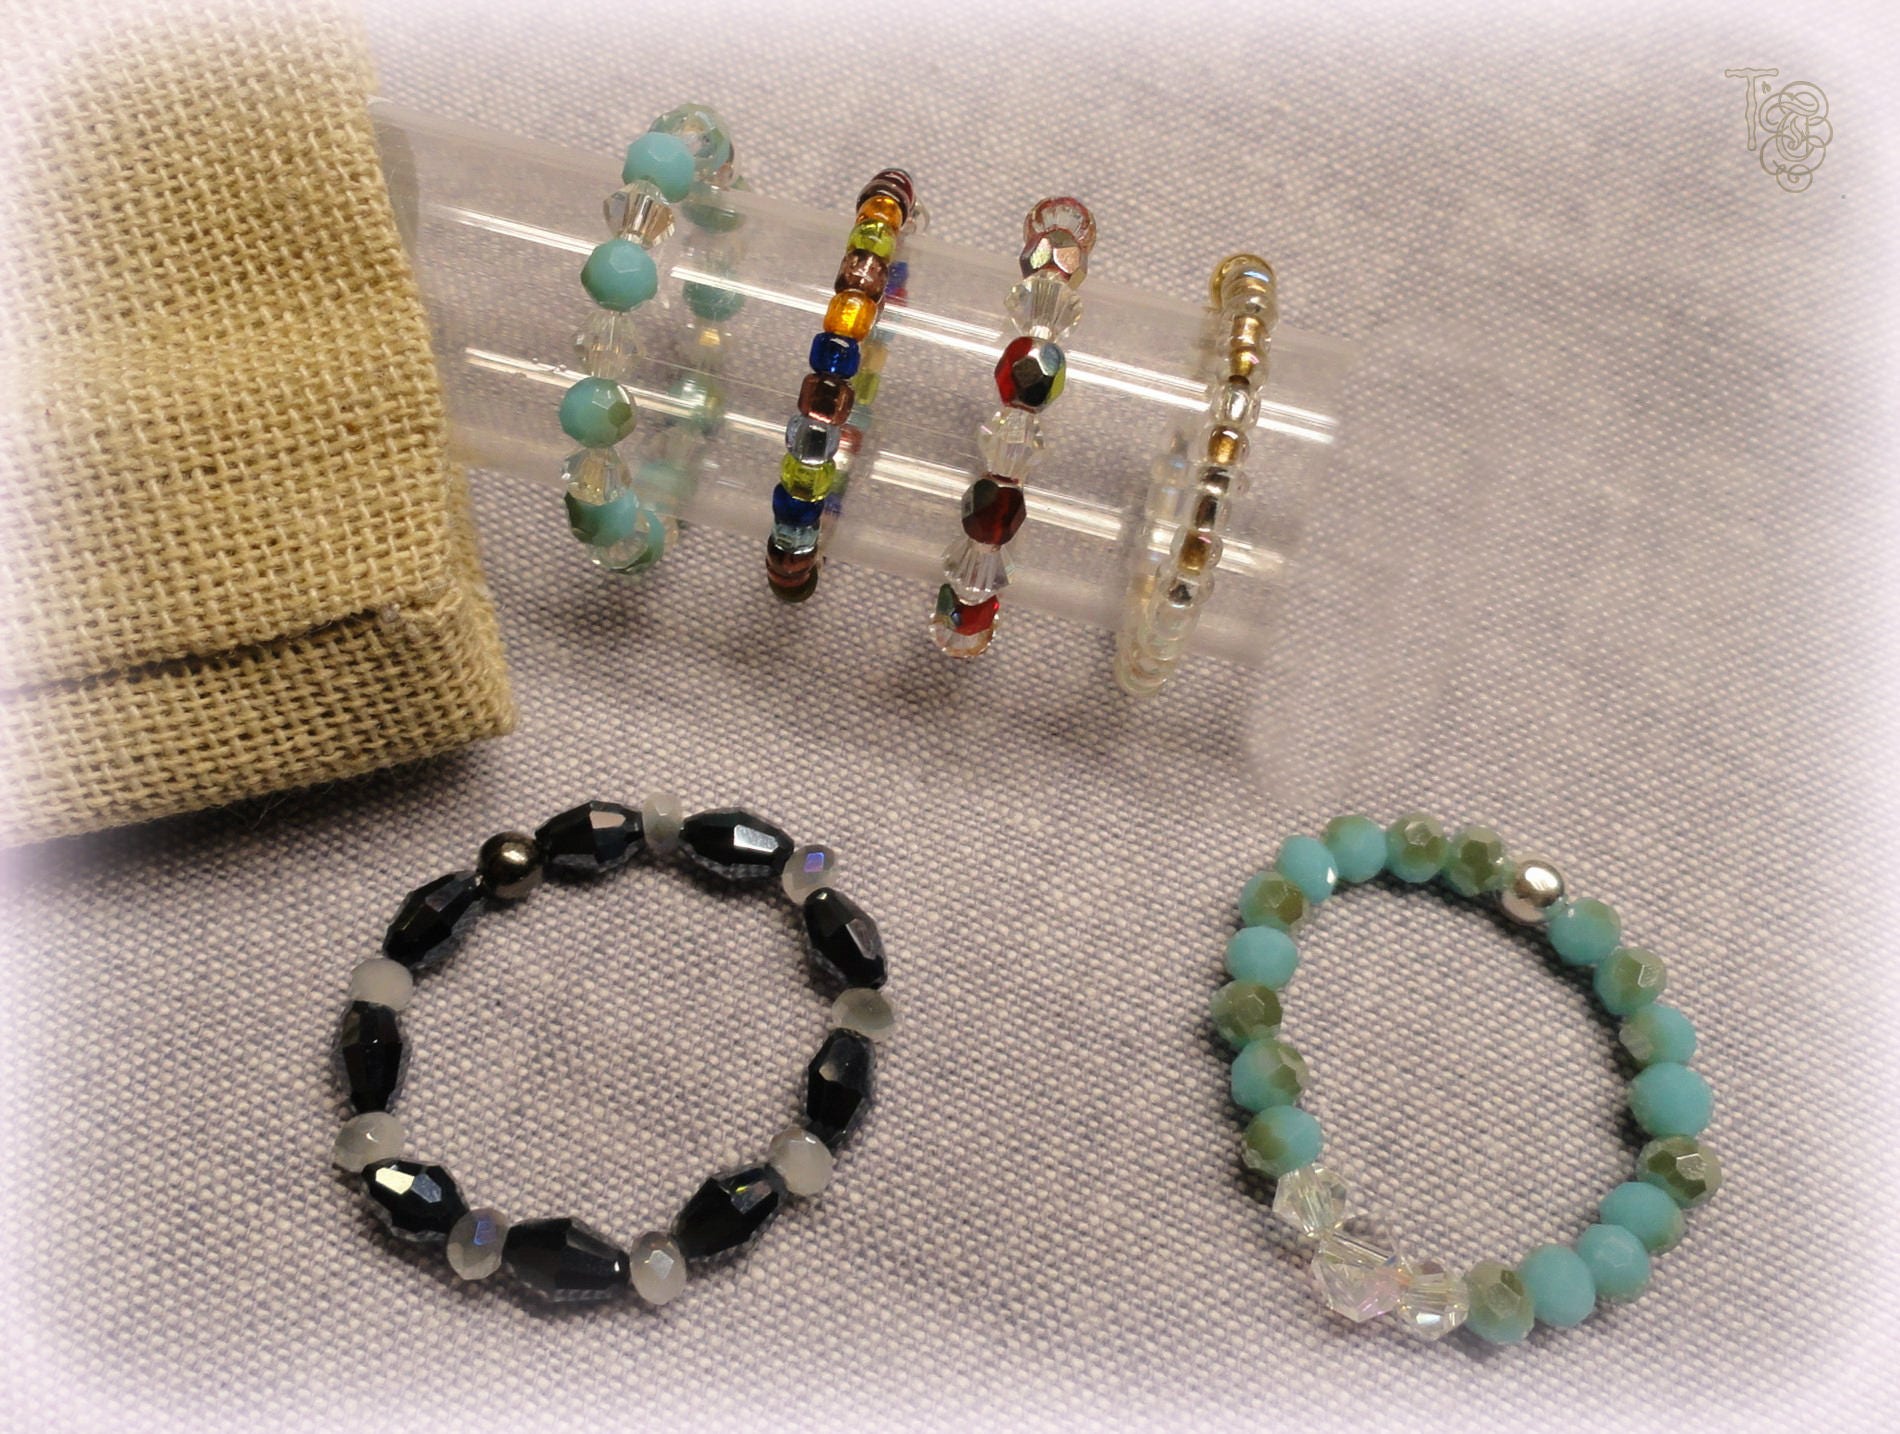 Fun Stretch and Stack Rings/Perfect for anyone with Arthritis or